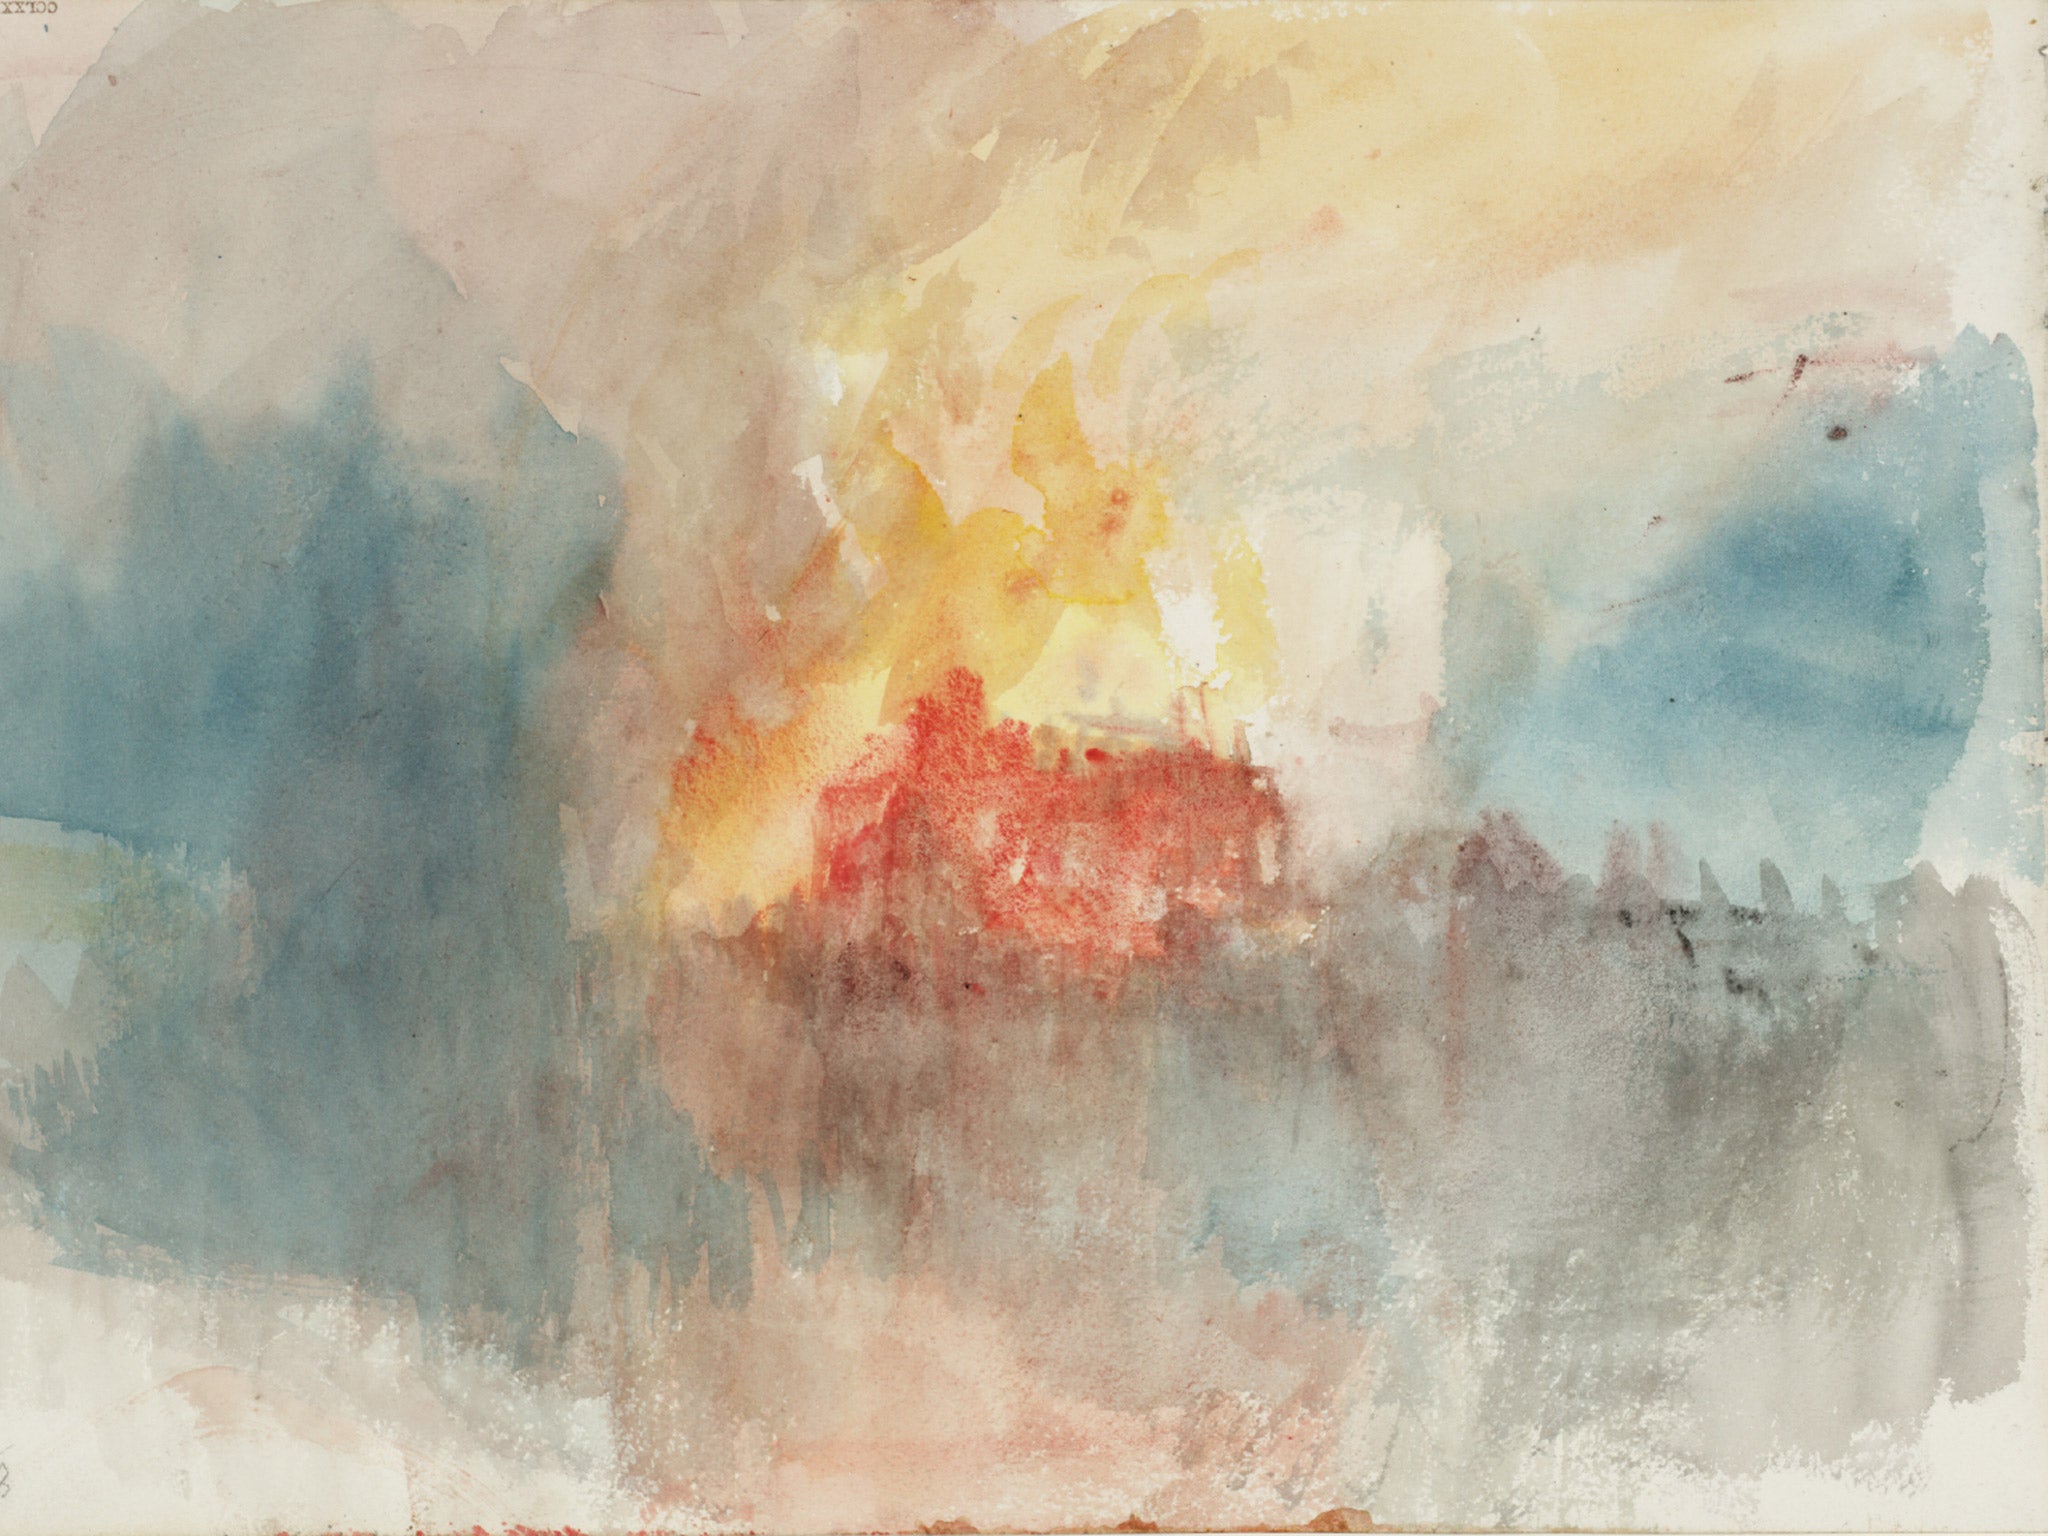 Experts now believe ‘The Burning of the Houses of Parliament’, a collection including nine watercolours by JMW Turner, inspired by a blaze on 16 October 1834, actually depict a fire at the Tower of London seven years later